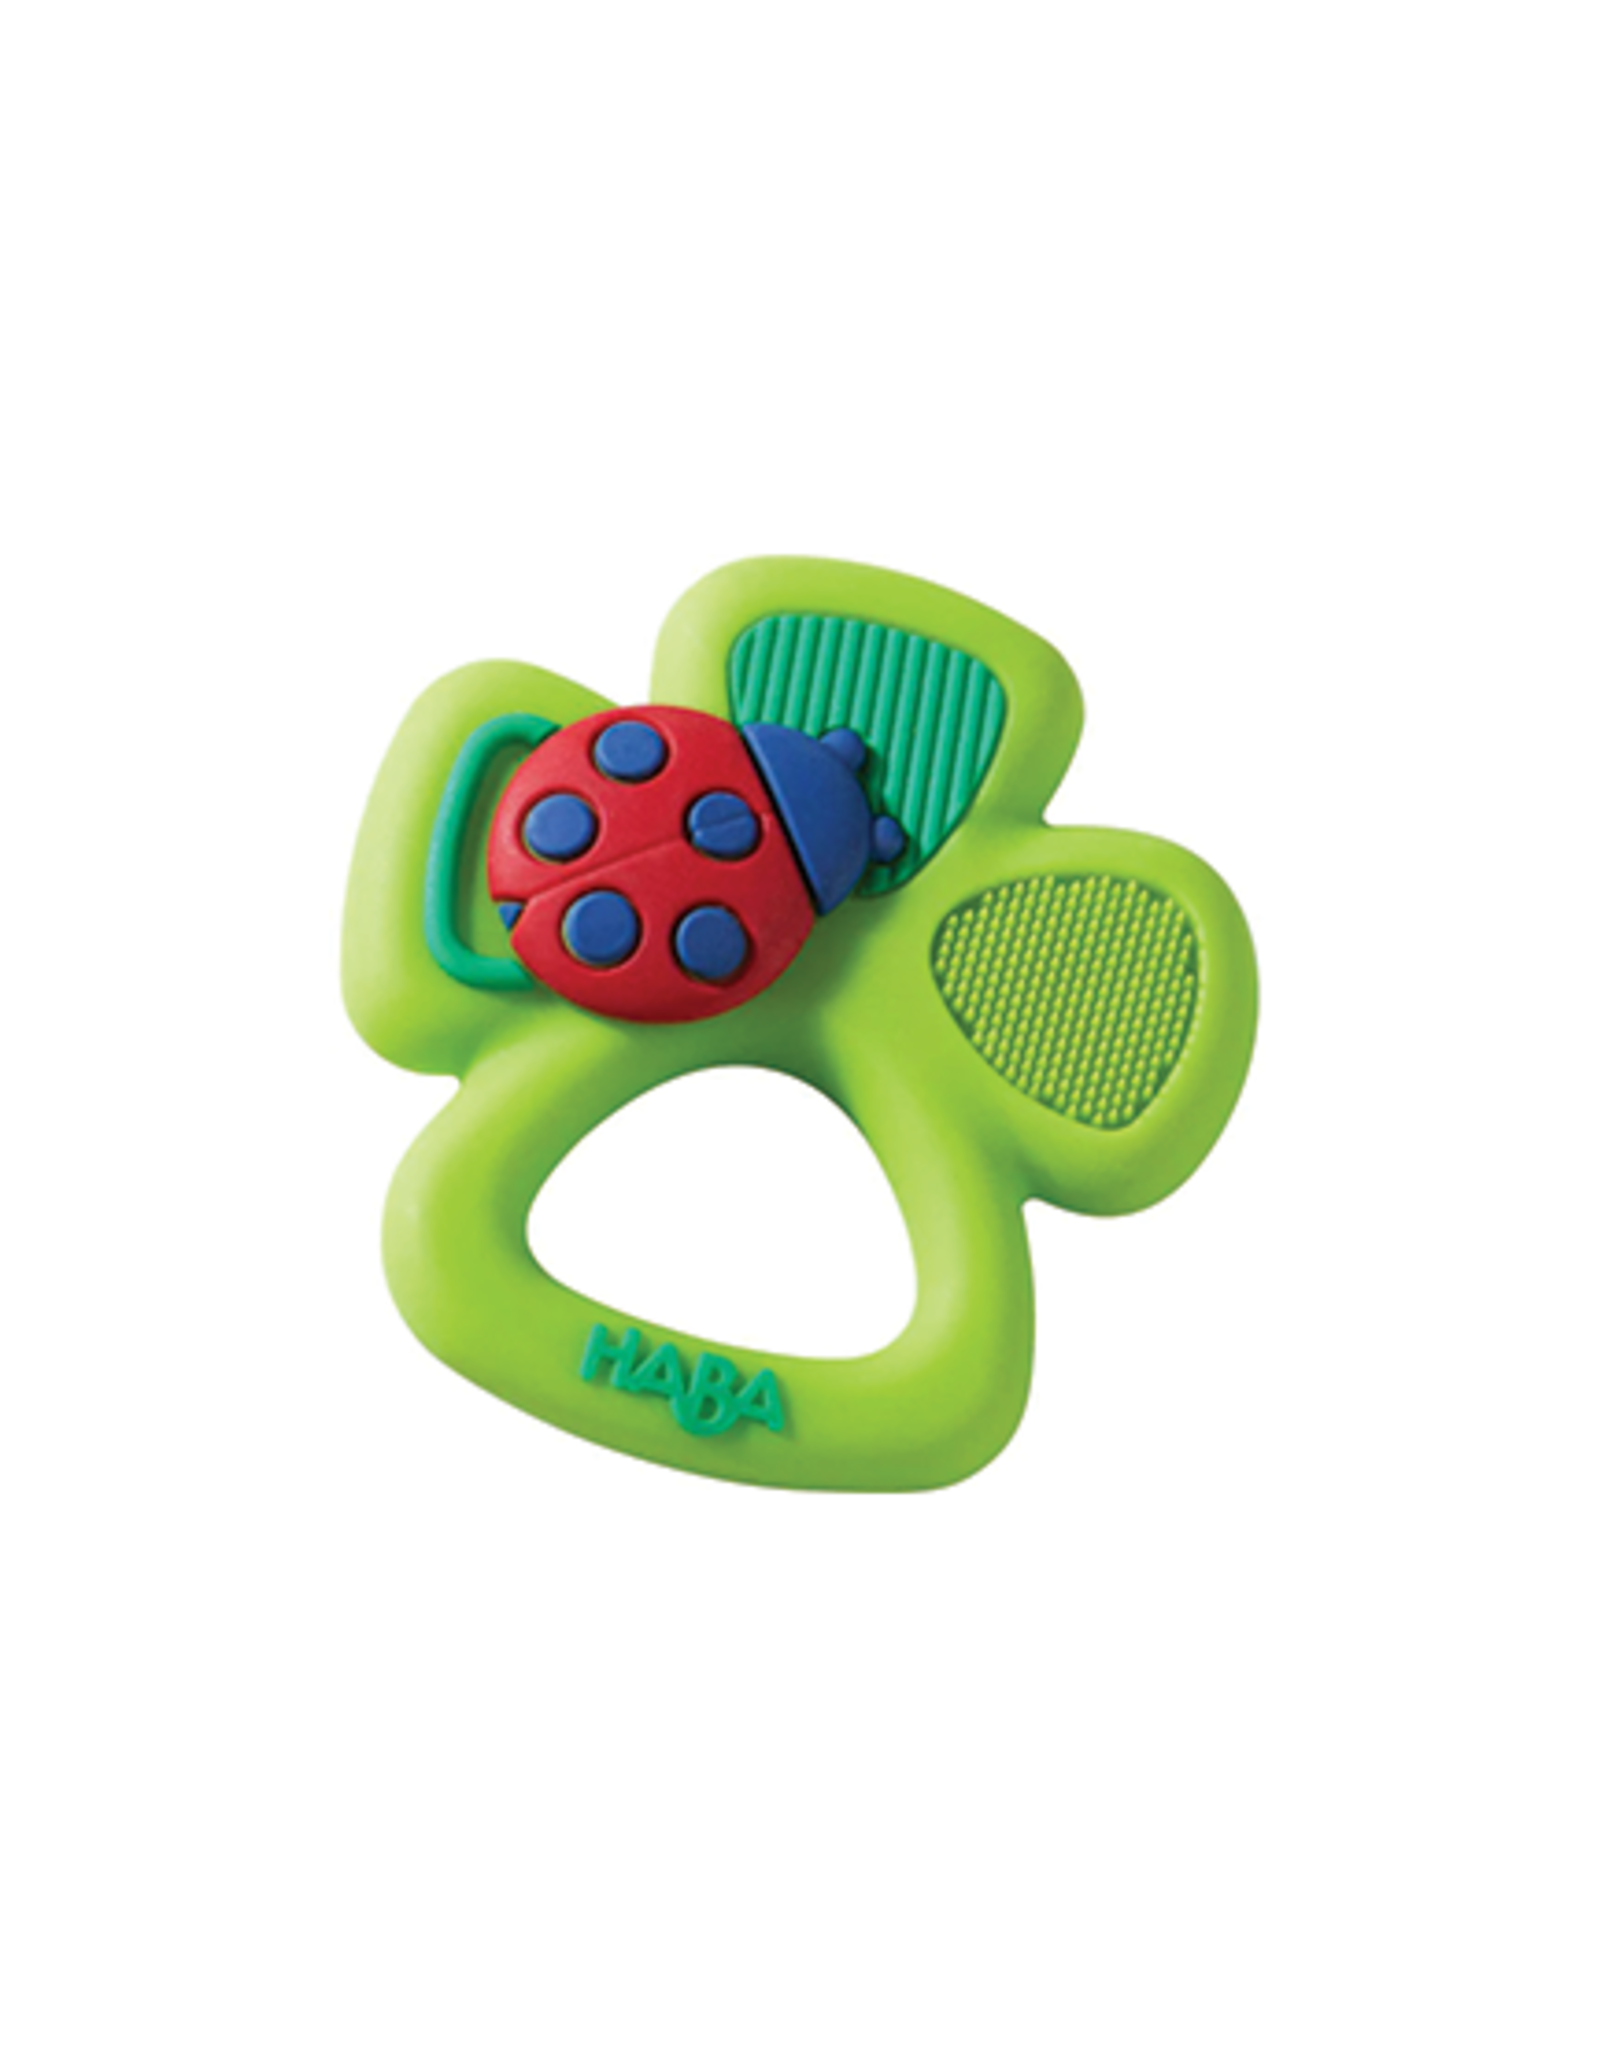 Haba HABA® Lucky Clover Clutching Toy